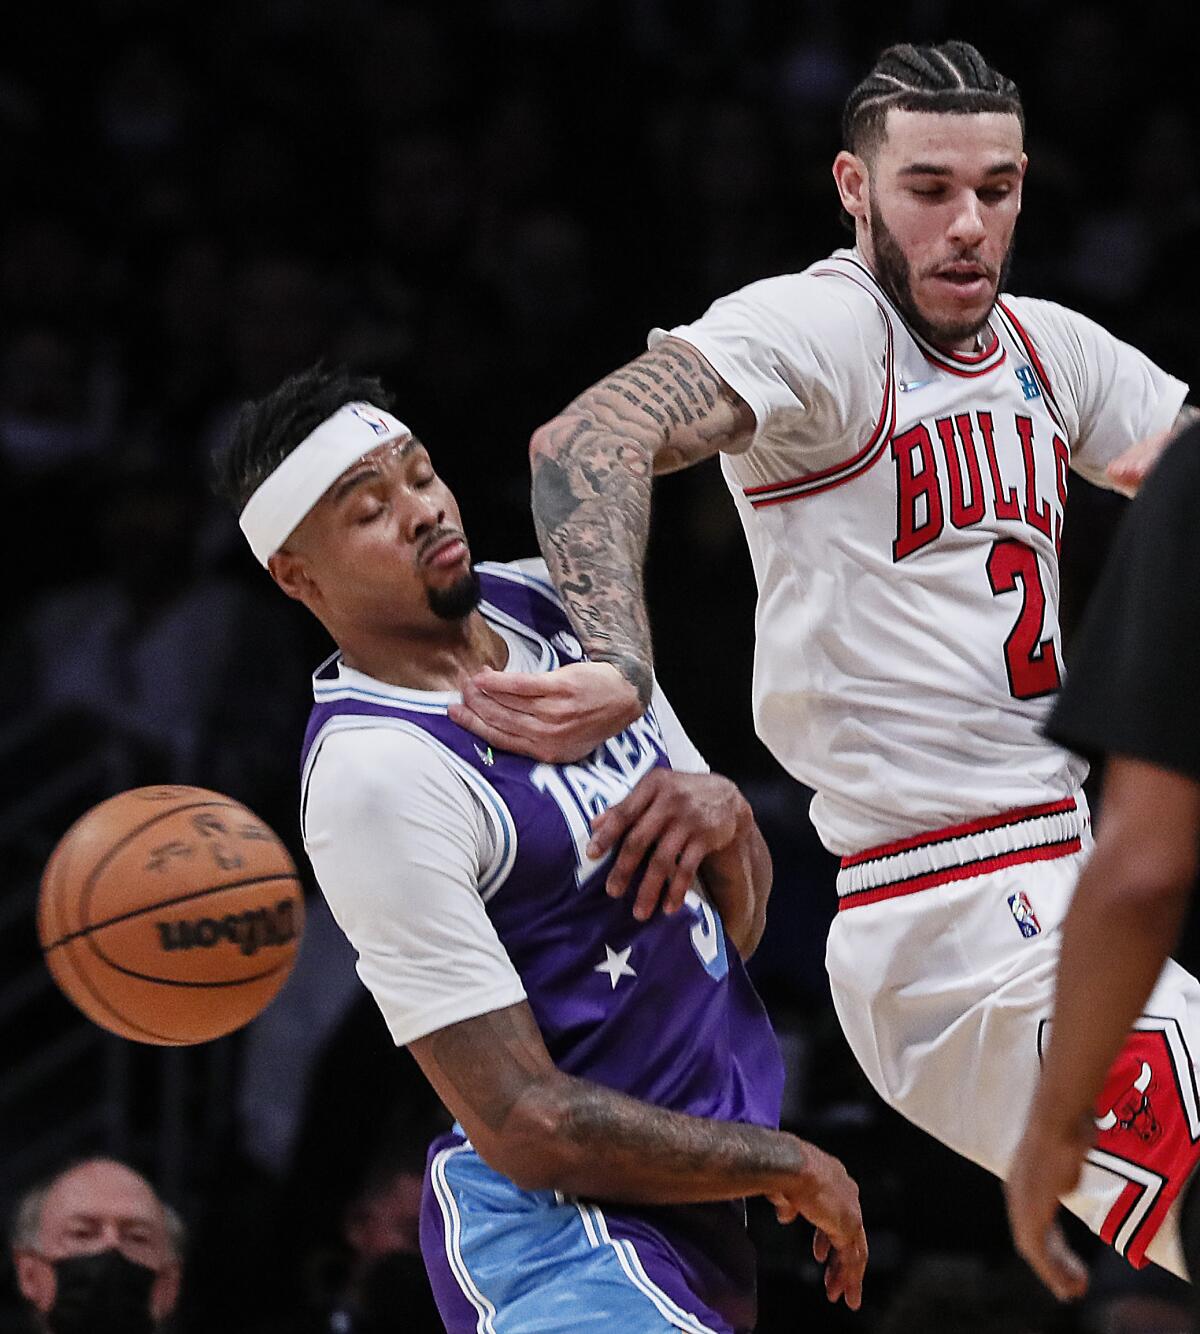 Bulls guard Lonzo Ball (2) saves the ball from going out of bounds while pressured by Lakers guard Talen Horton-Tucker.